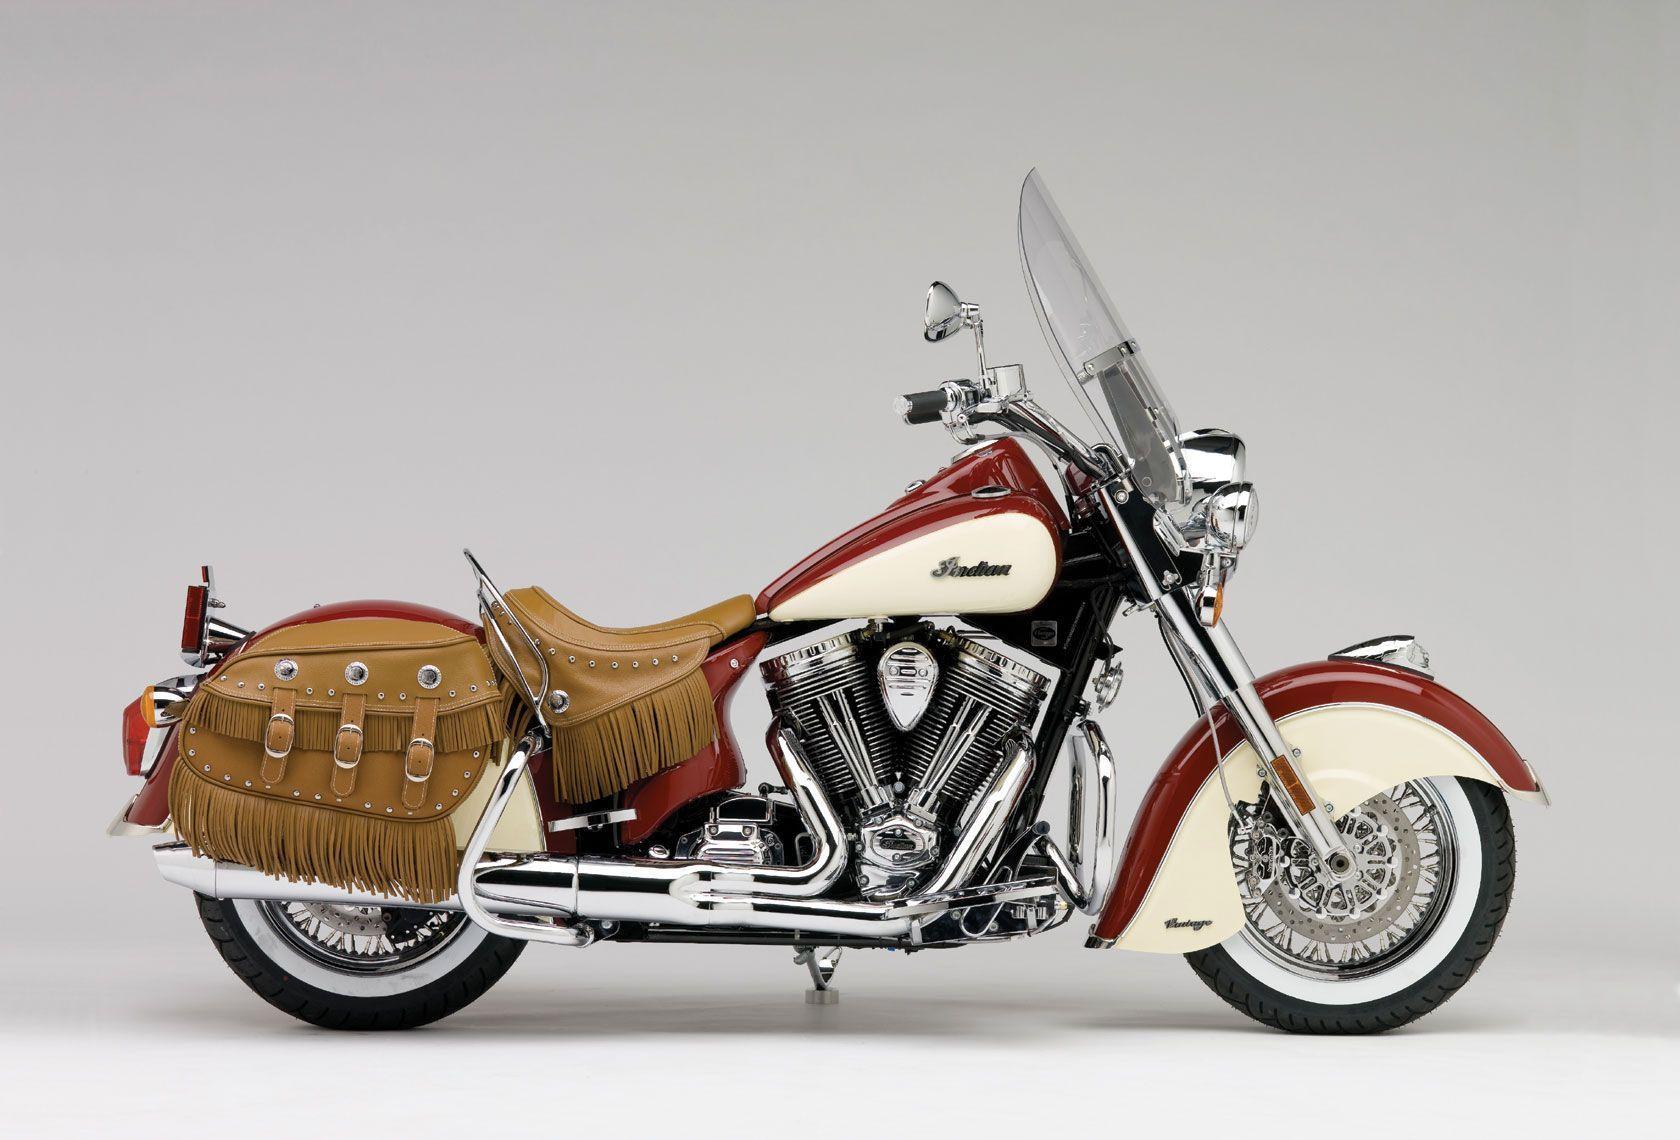 Vintage Indian Motorcycles Wallpaper HD Picture 4 HD Wallpaper